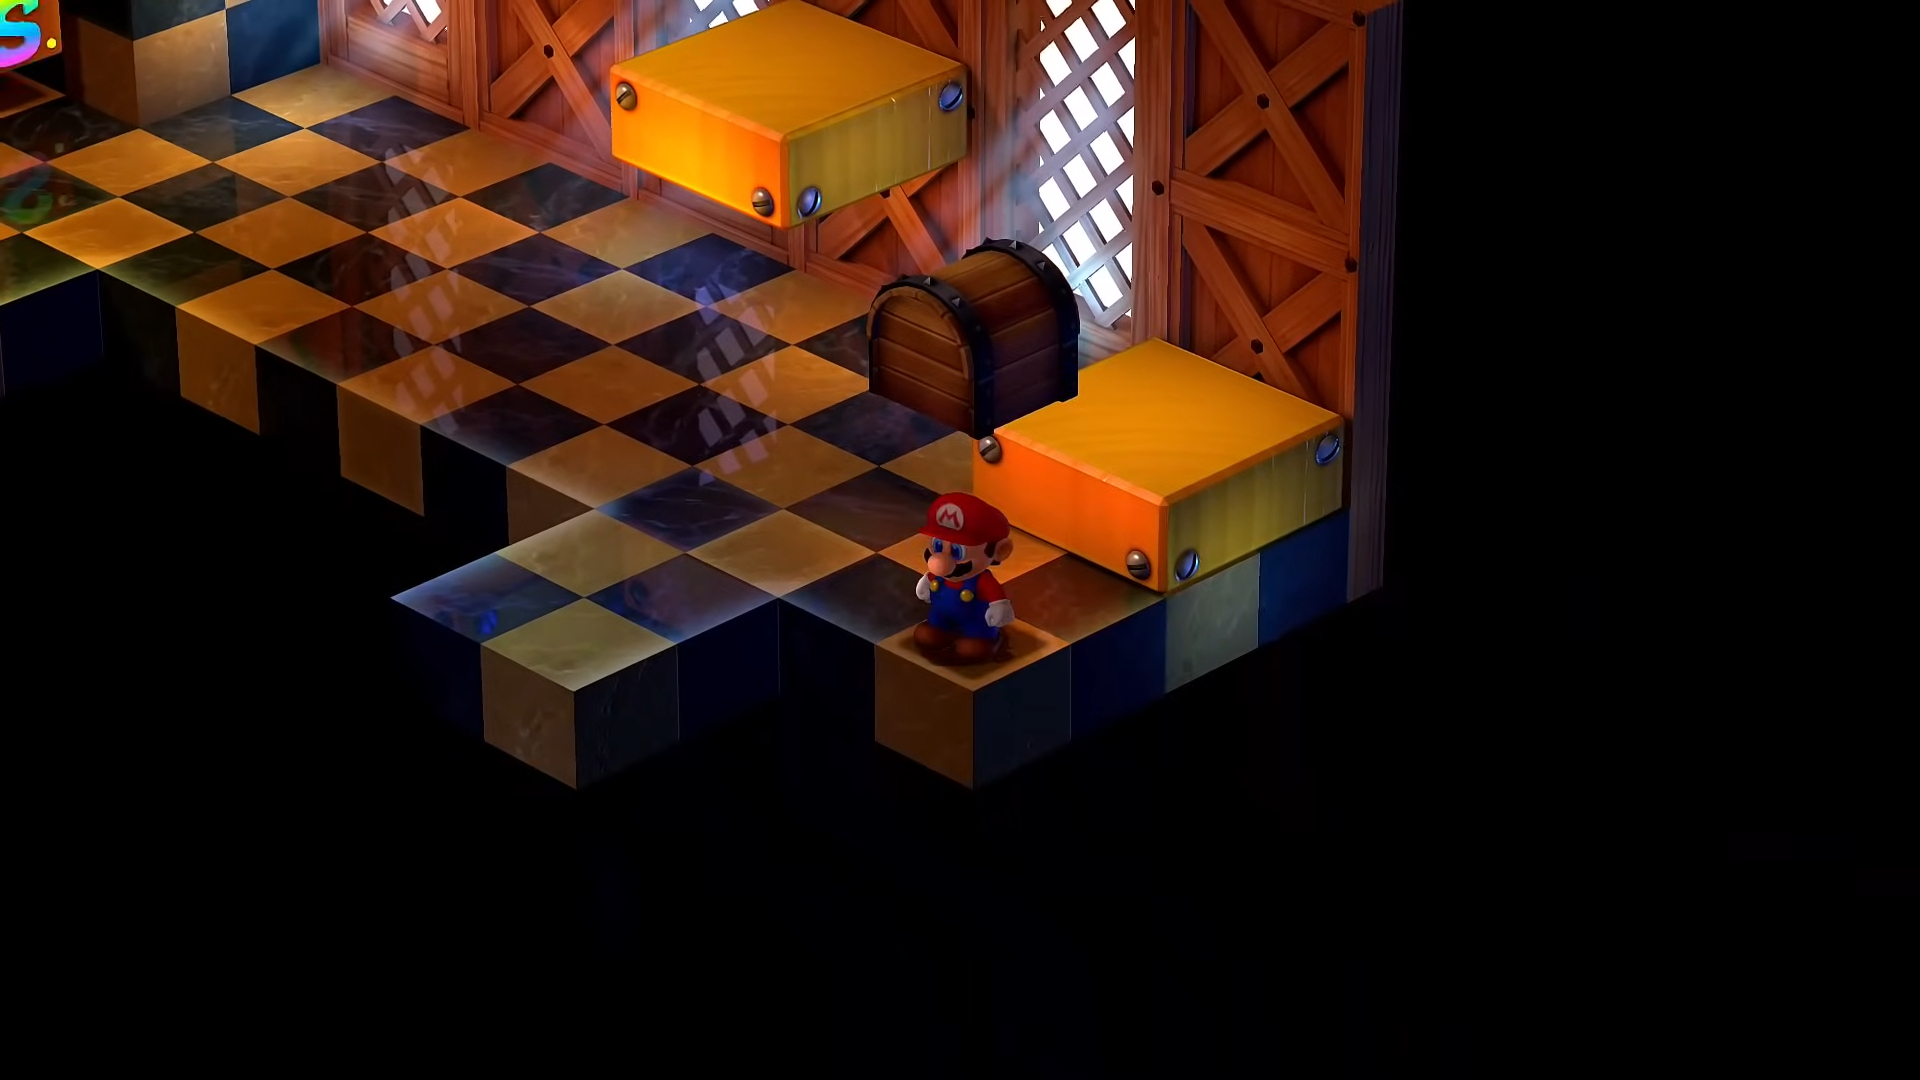 Mario in booster tower.